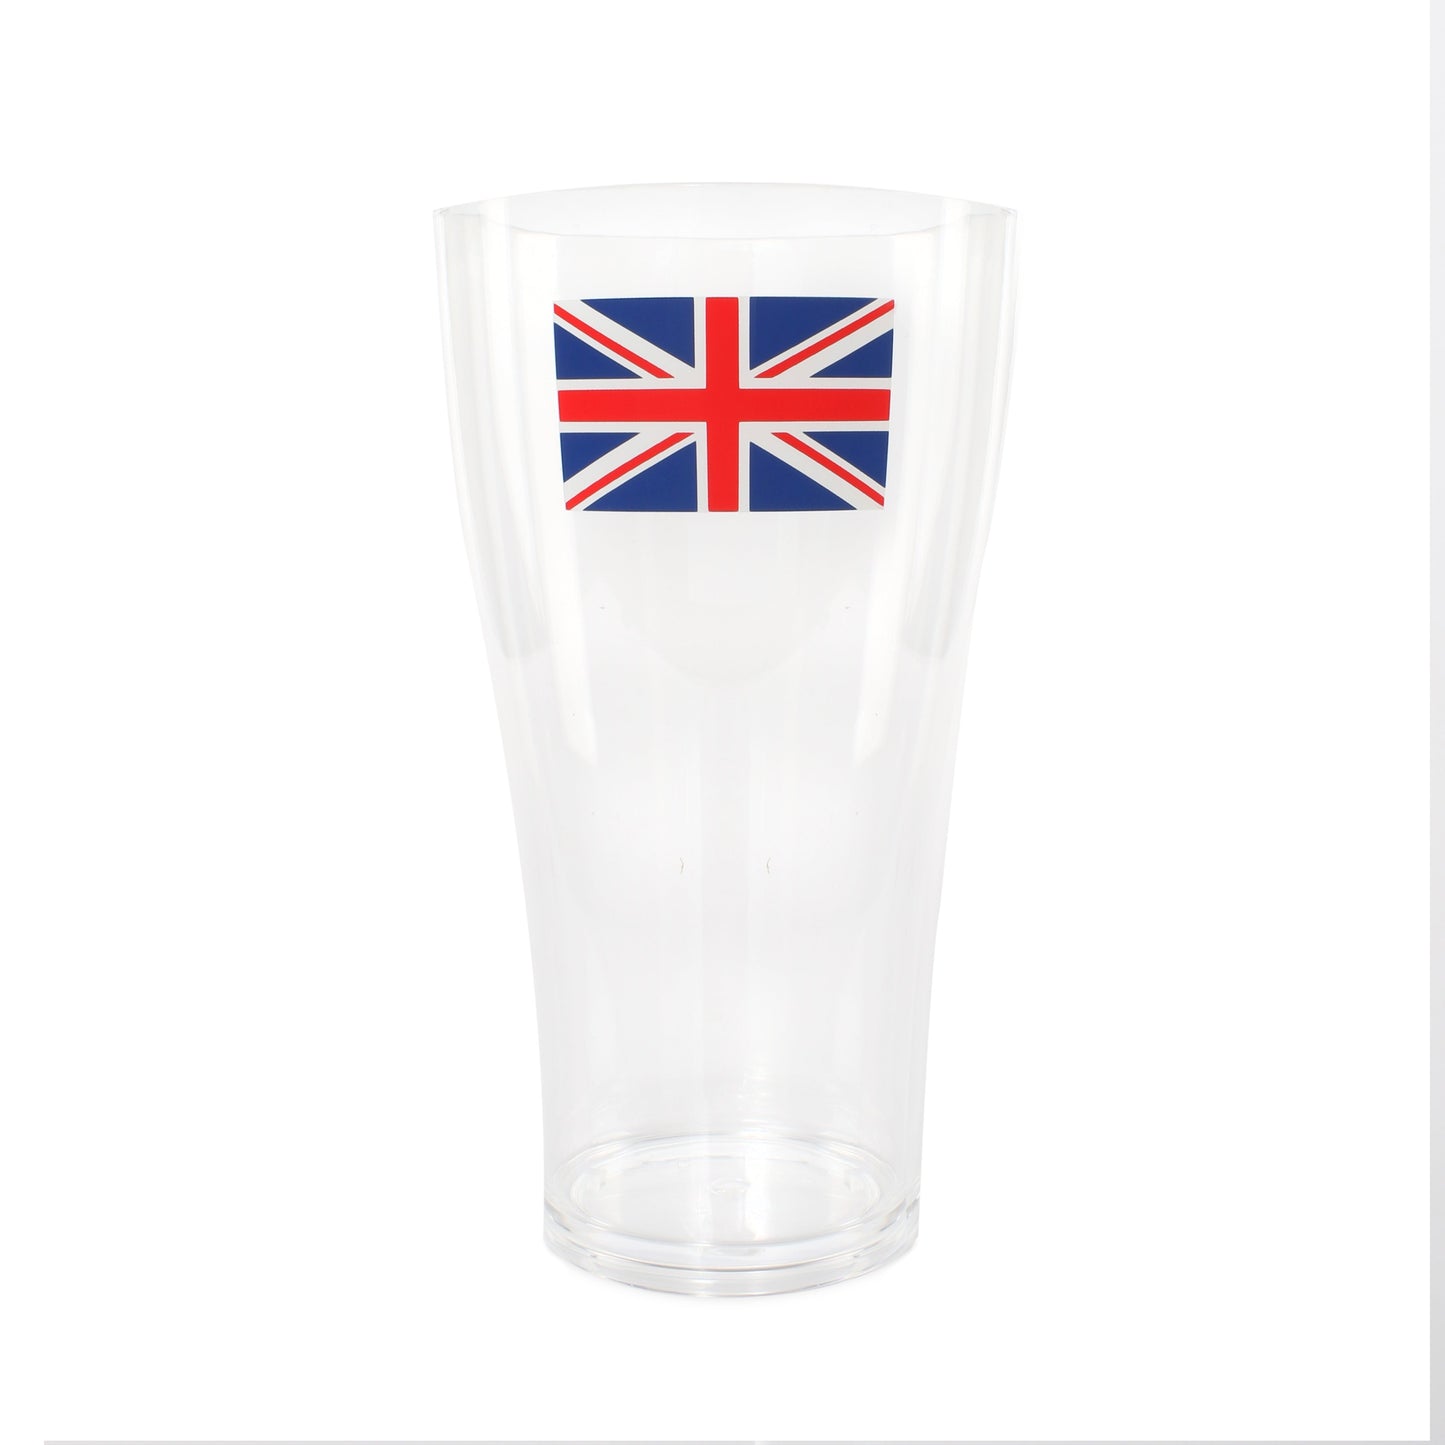 568ml HEAVY DUTY PLASTIC DISPOSABLE UNION JACK PINT CUP IN PACKS 12